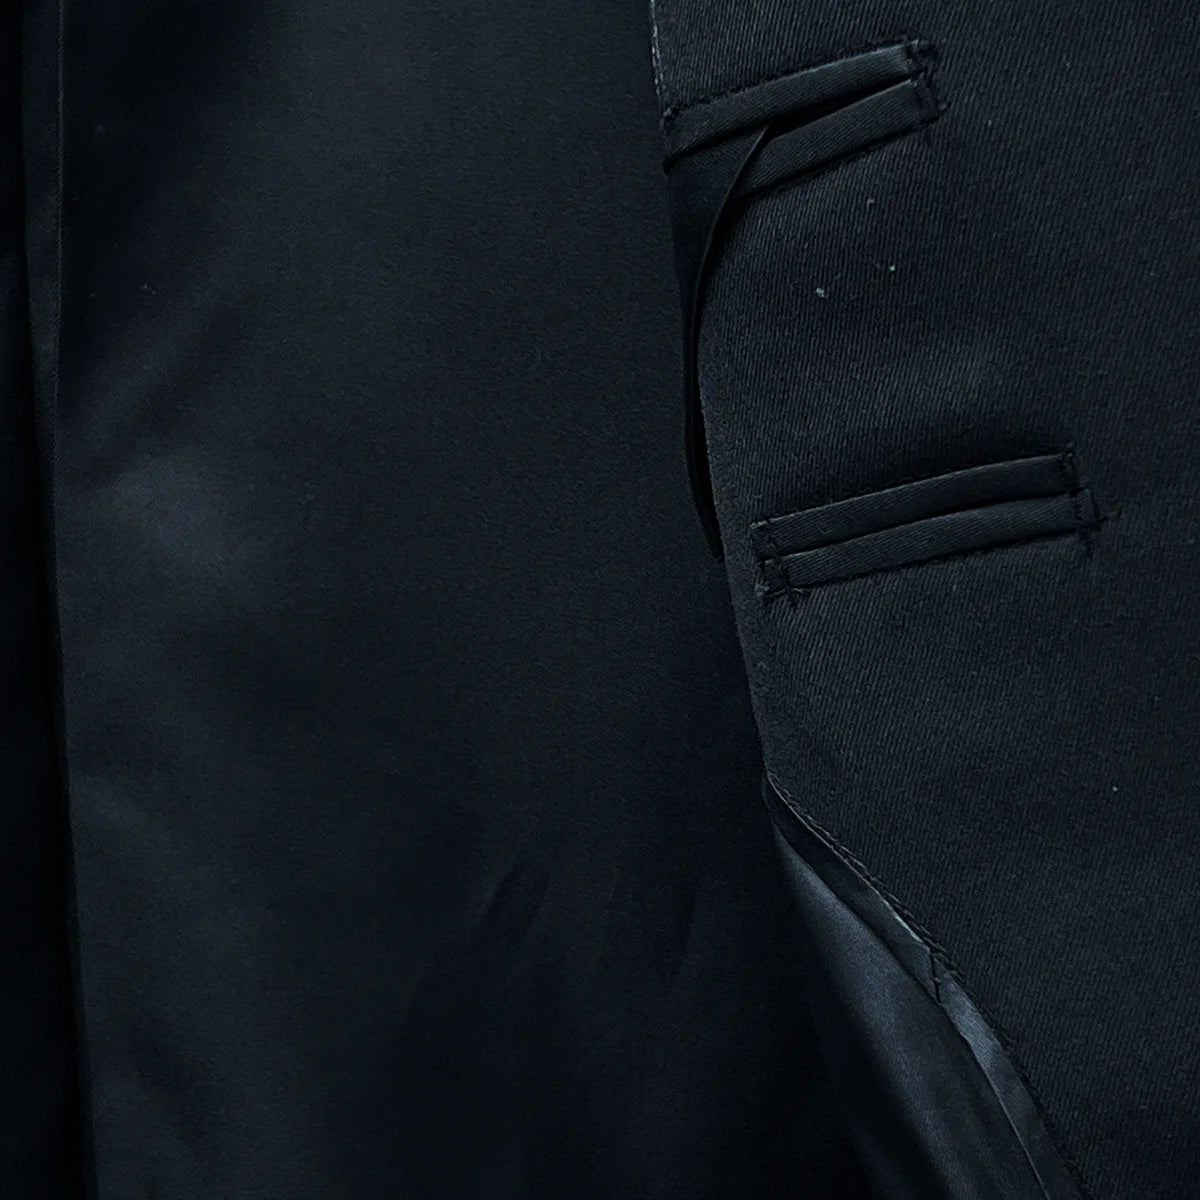 Bemberg lining providing a smooth and comfortable fit in a classic black men's suit.